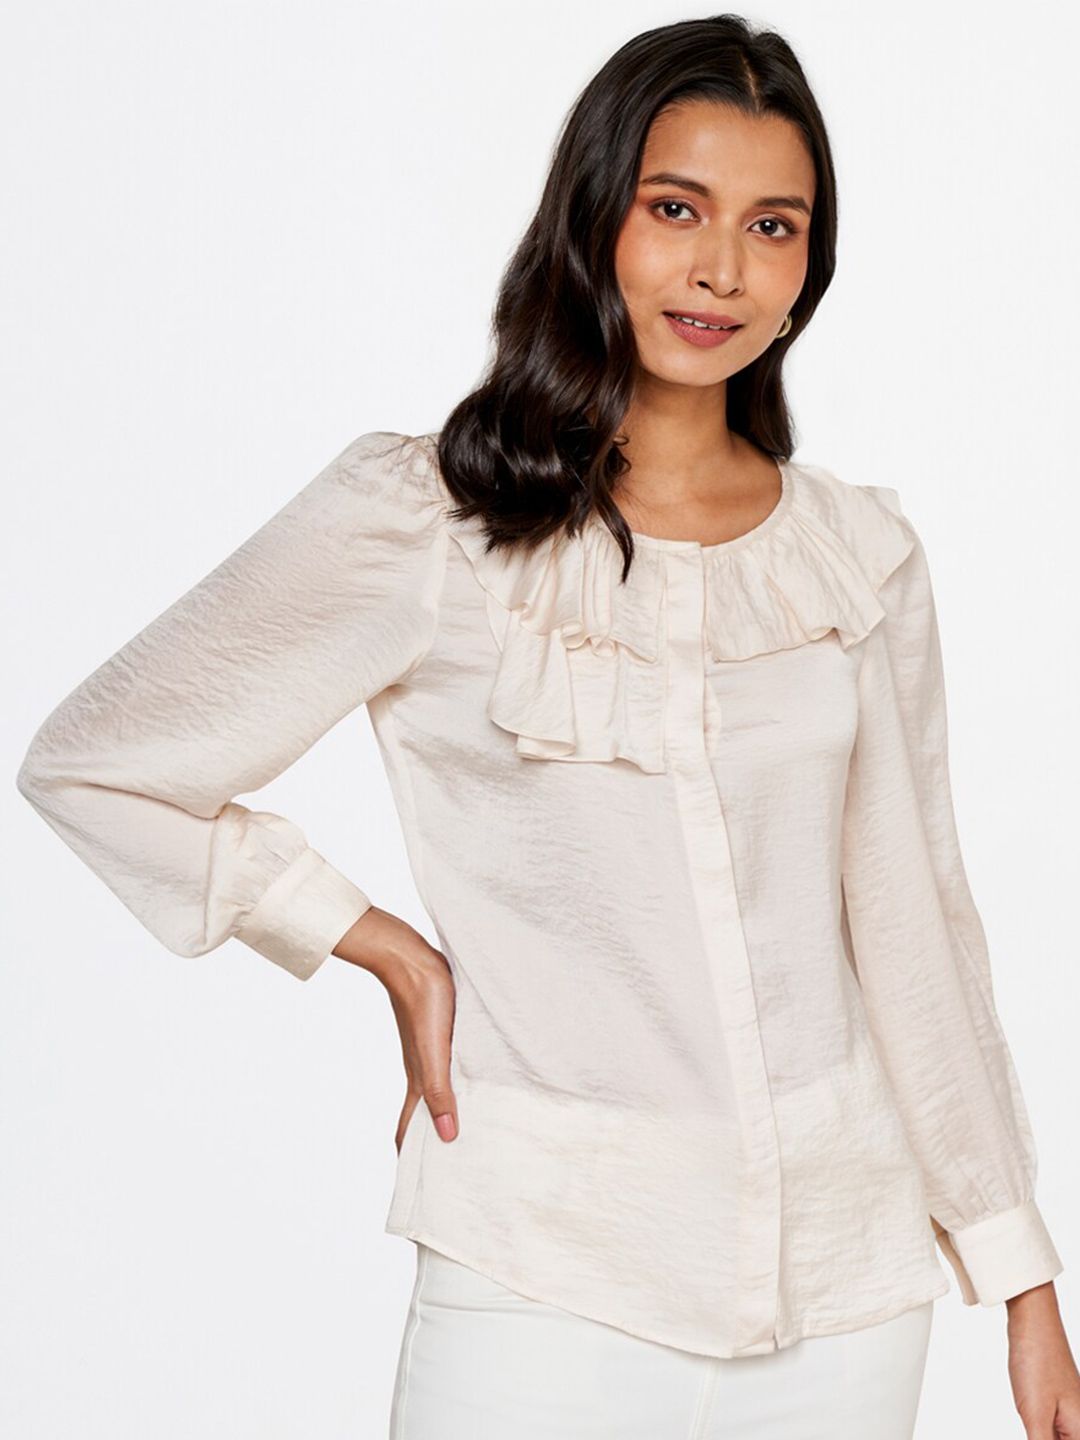 AND Cream-Coloured Solid Regular Top Price in India